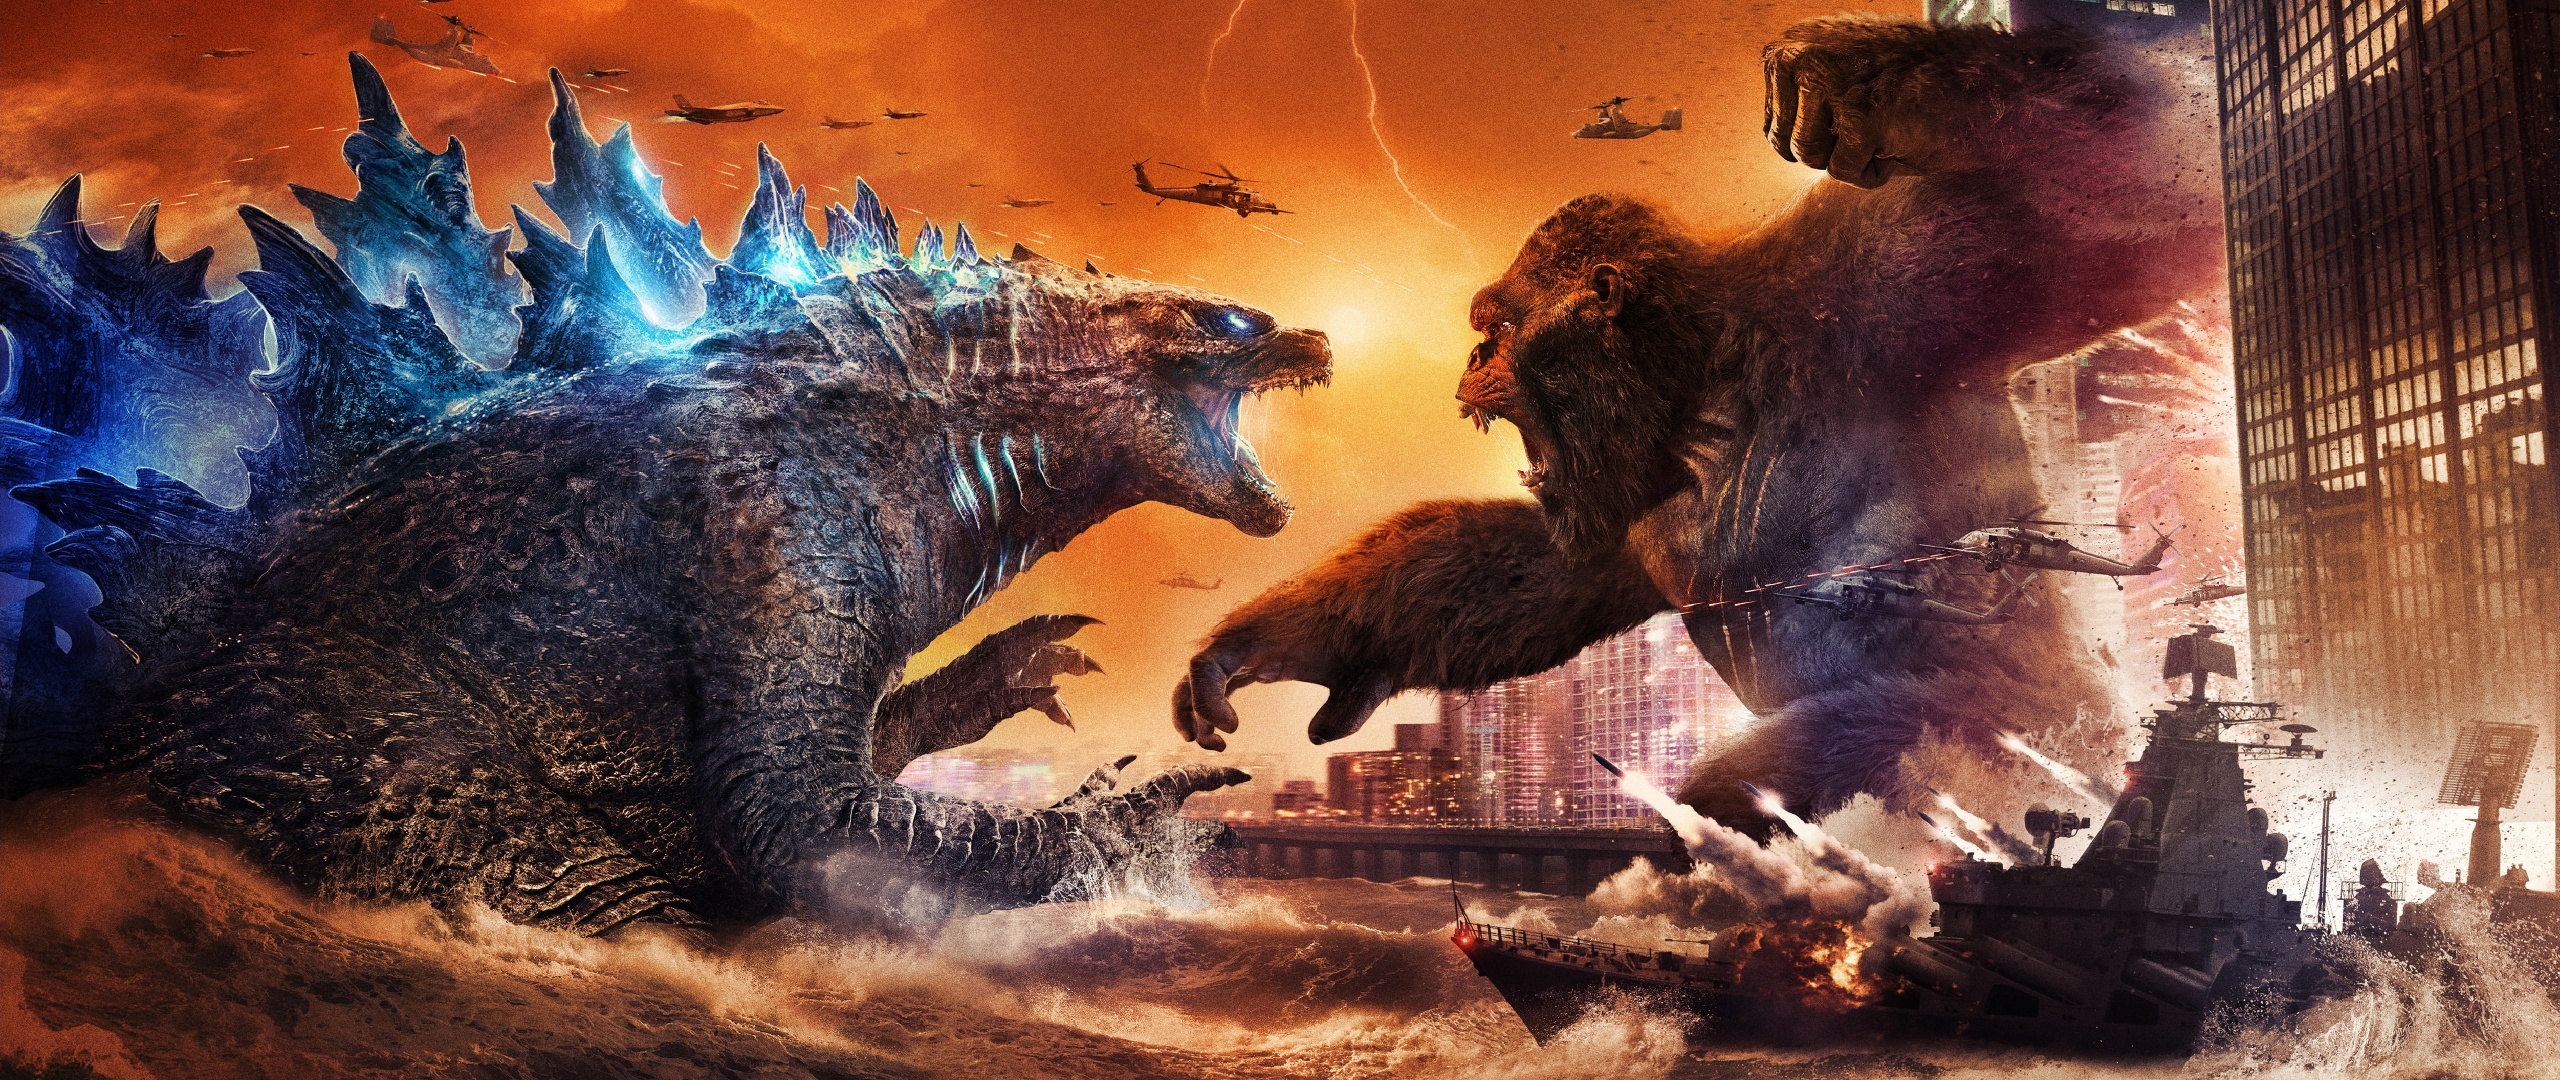 Godzilla: Has fought characters from other franchises in crossover media, such as King Kong. 2560x1080 Dual Screen Wallpaper.